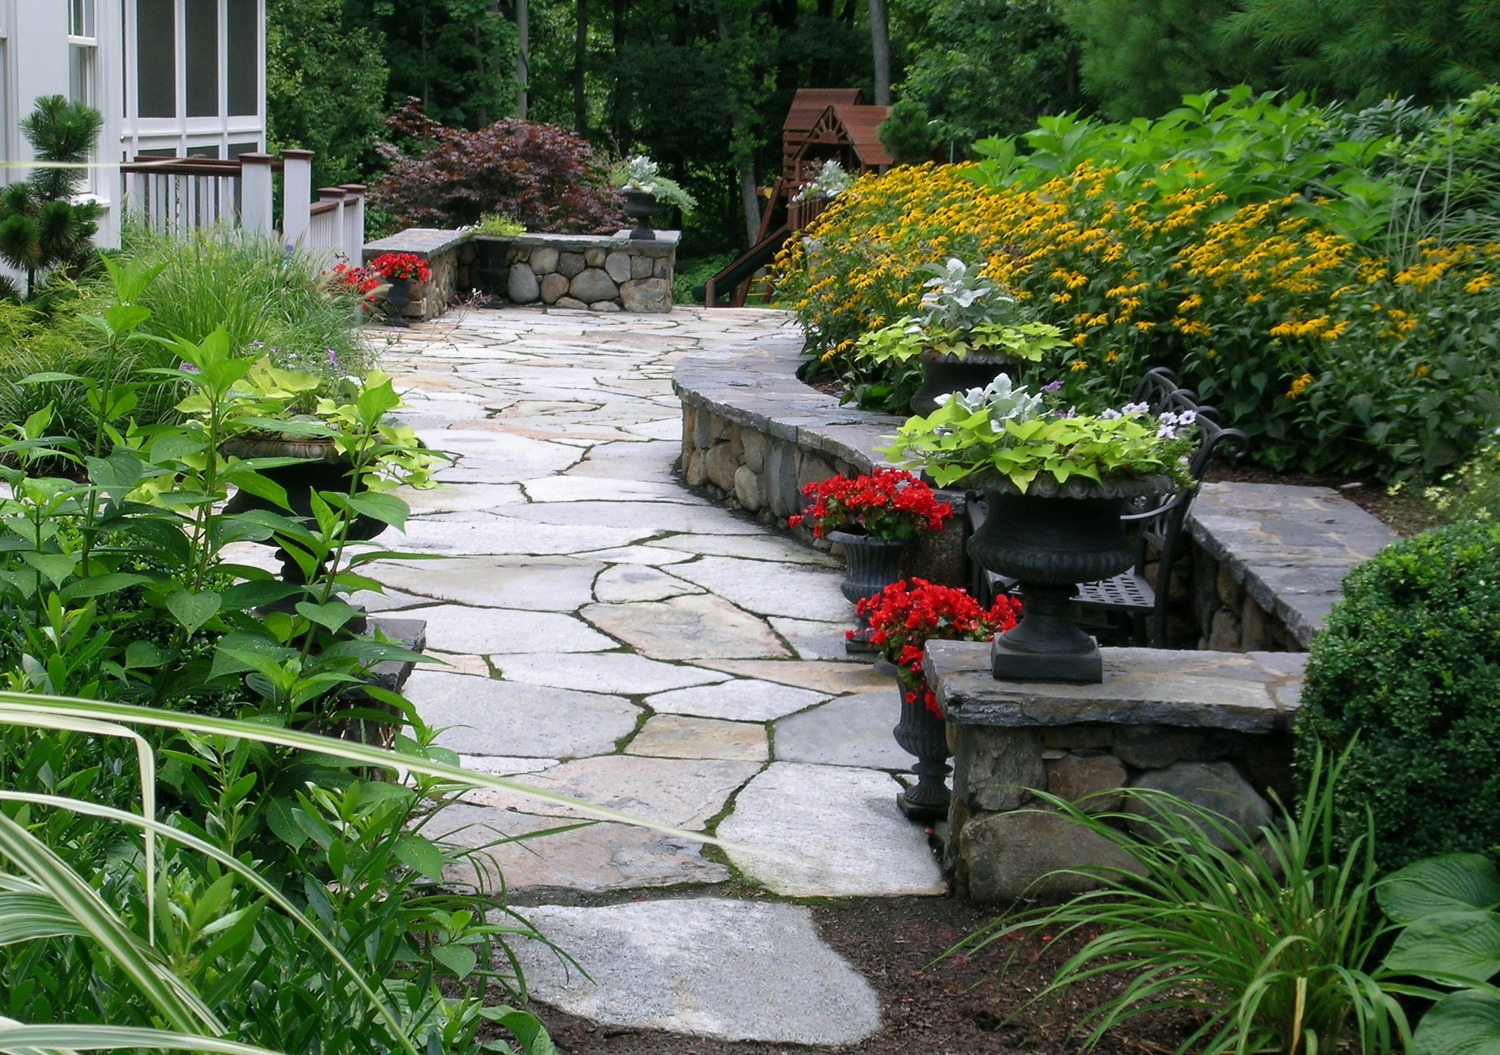 A beautiful garden pathway lined with vibrant flowers and lush greenery, featuring stone pavers and decorative planters, leads to a charming white house.